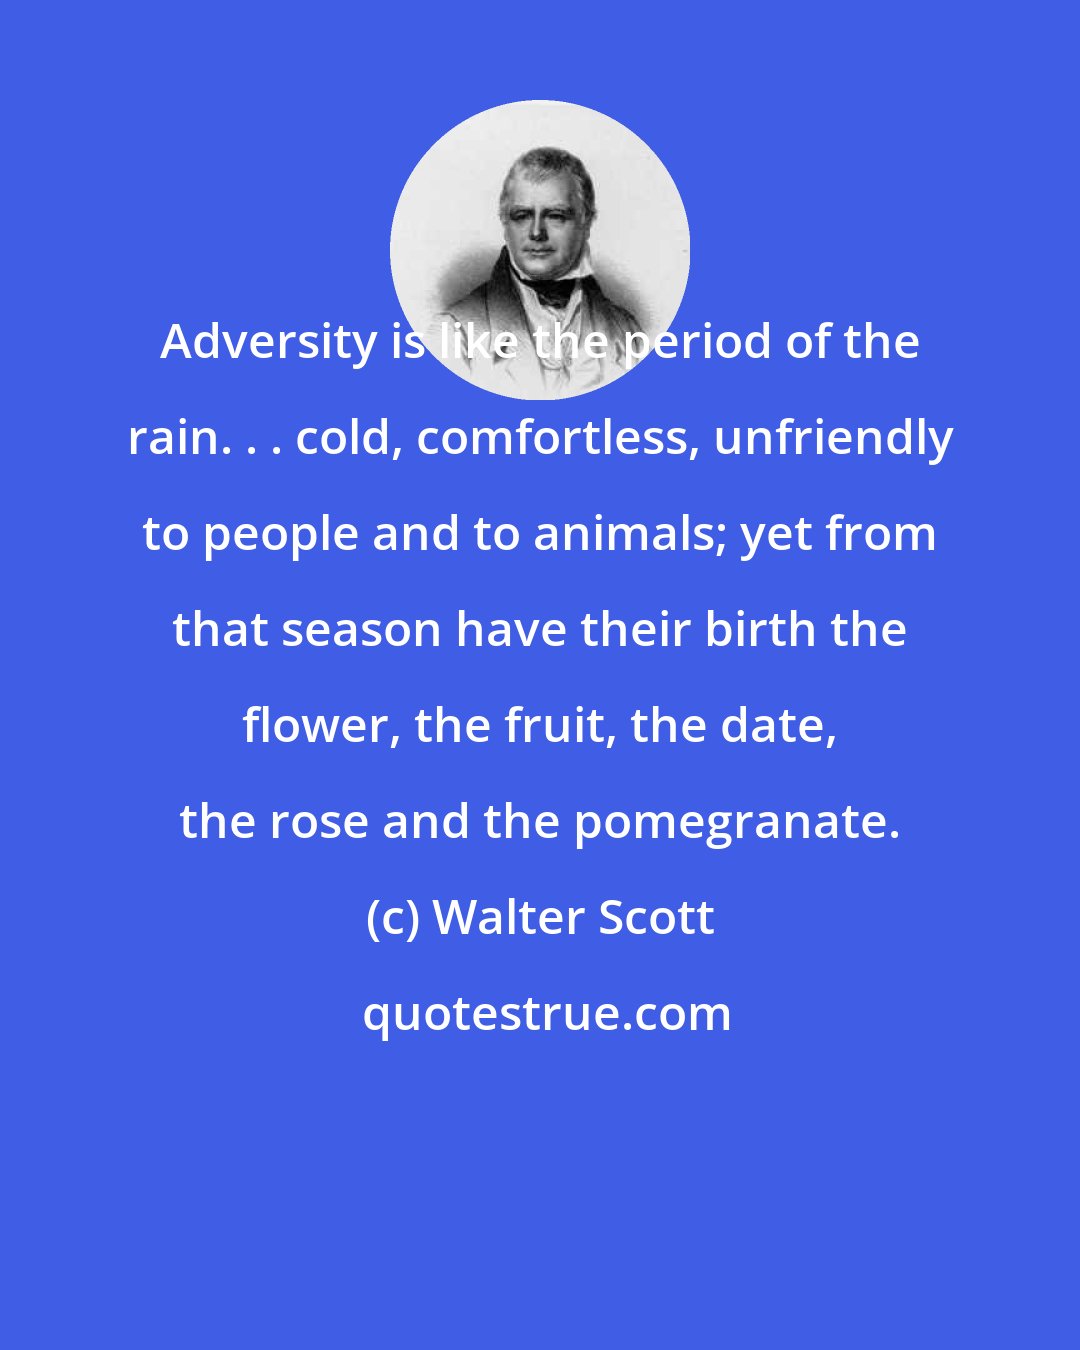 Walter Scott: Adversity is like the period of the rain. . . cold, comfortless, unfriendly to people and to animals; yet from that season have their birth the flower, the fruit, the date, the rose and the pomegranate.